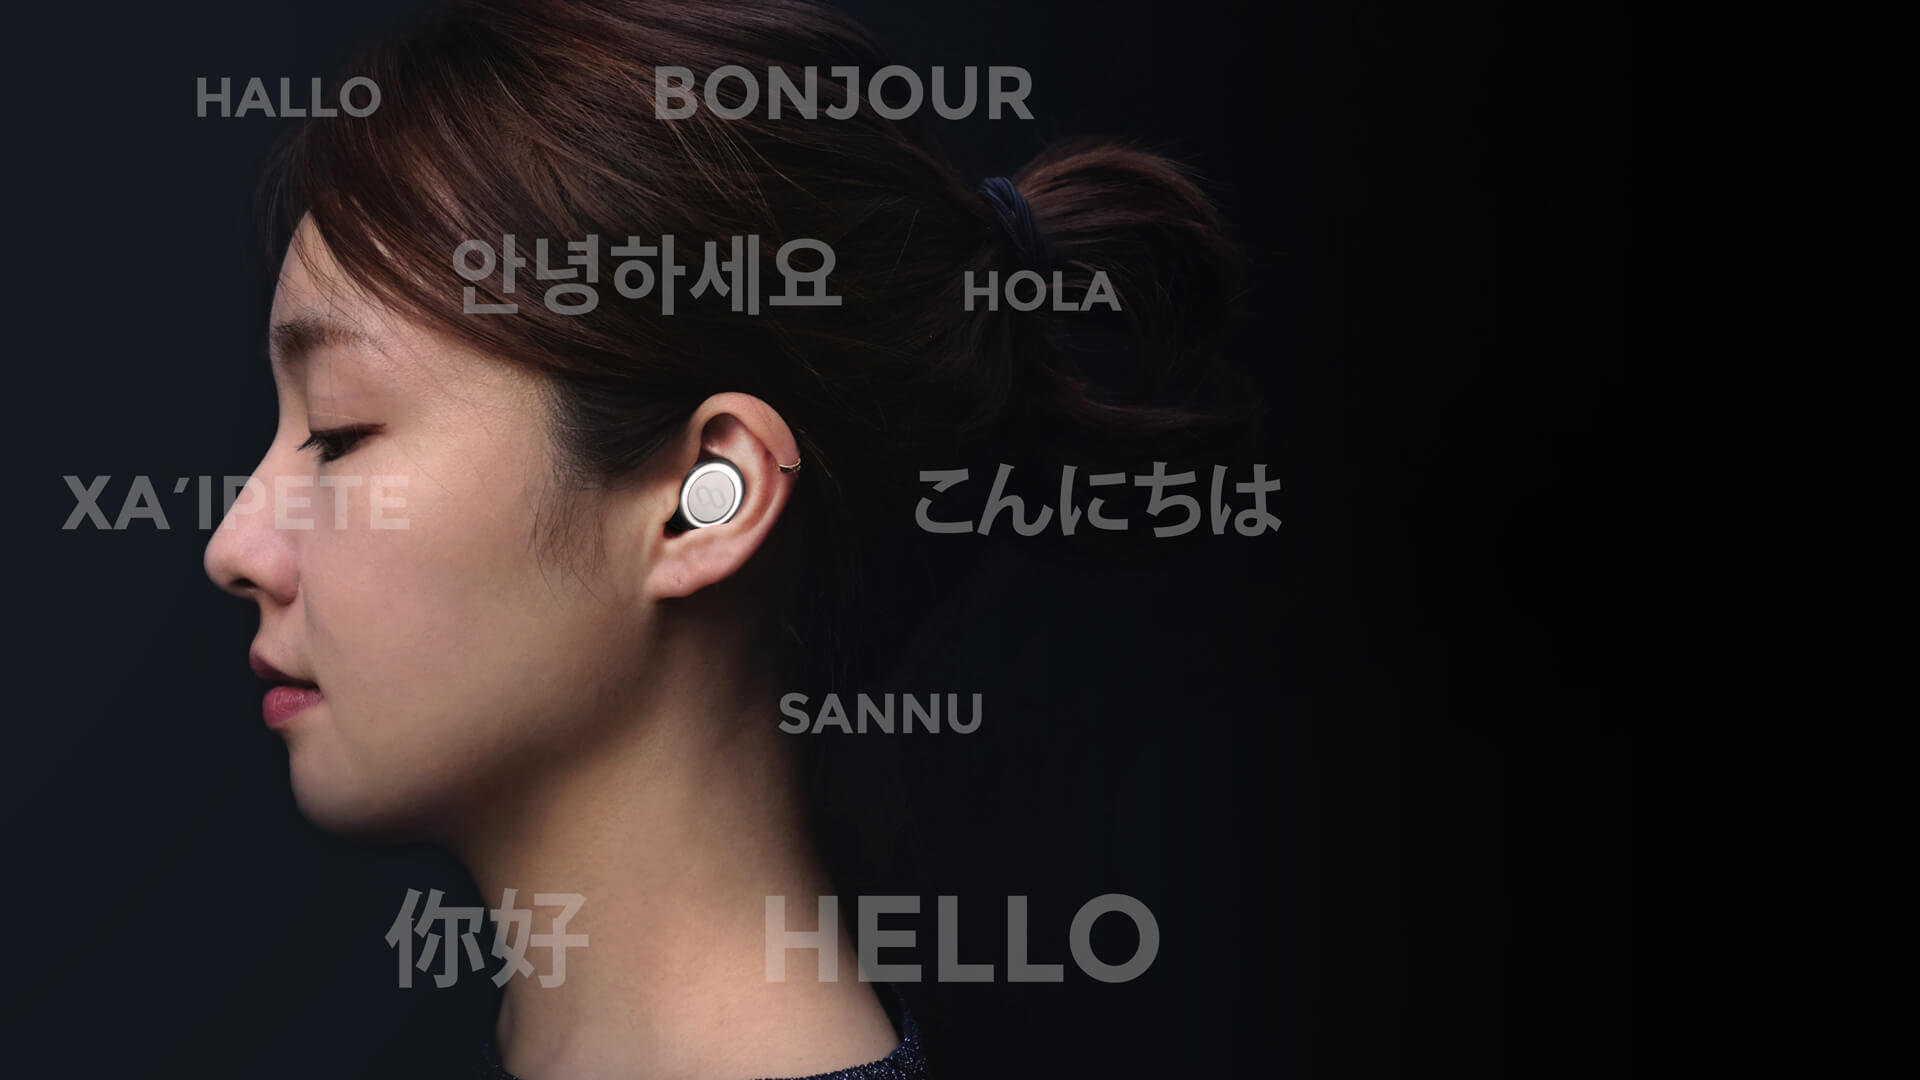 The earbuds that can translate